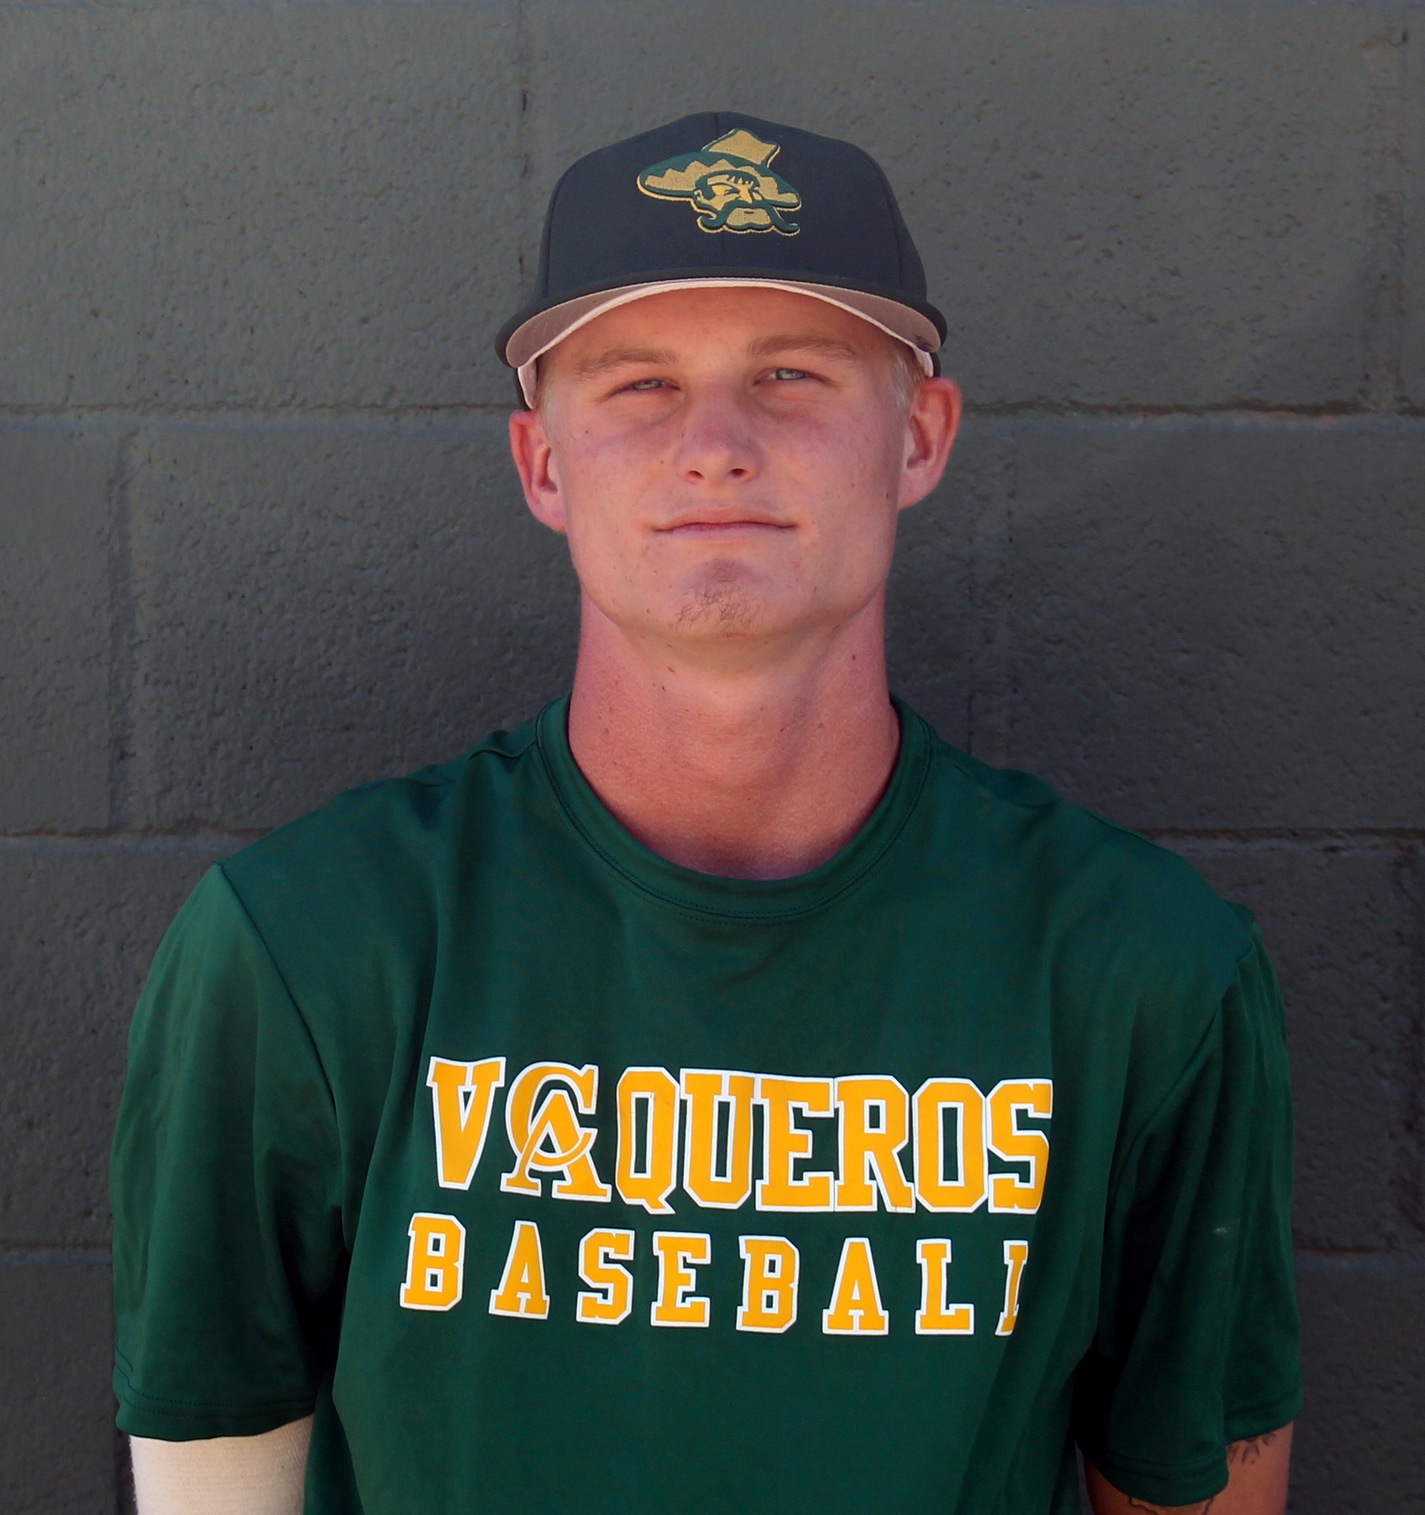 Ian Raidy with huge sac bunt to help Vaqueros in exciting game one.